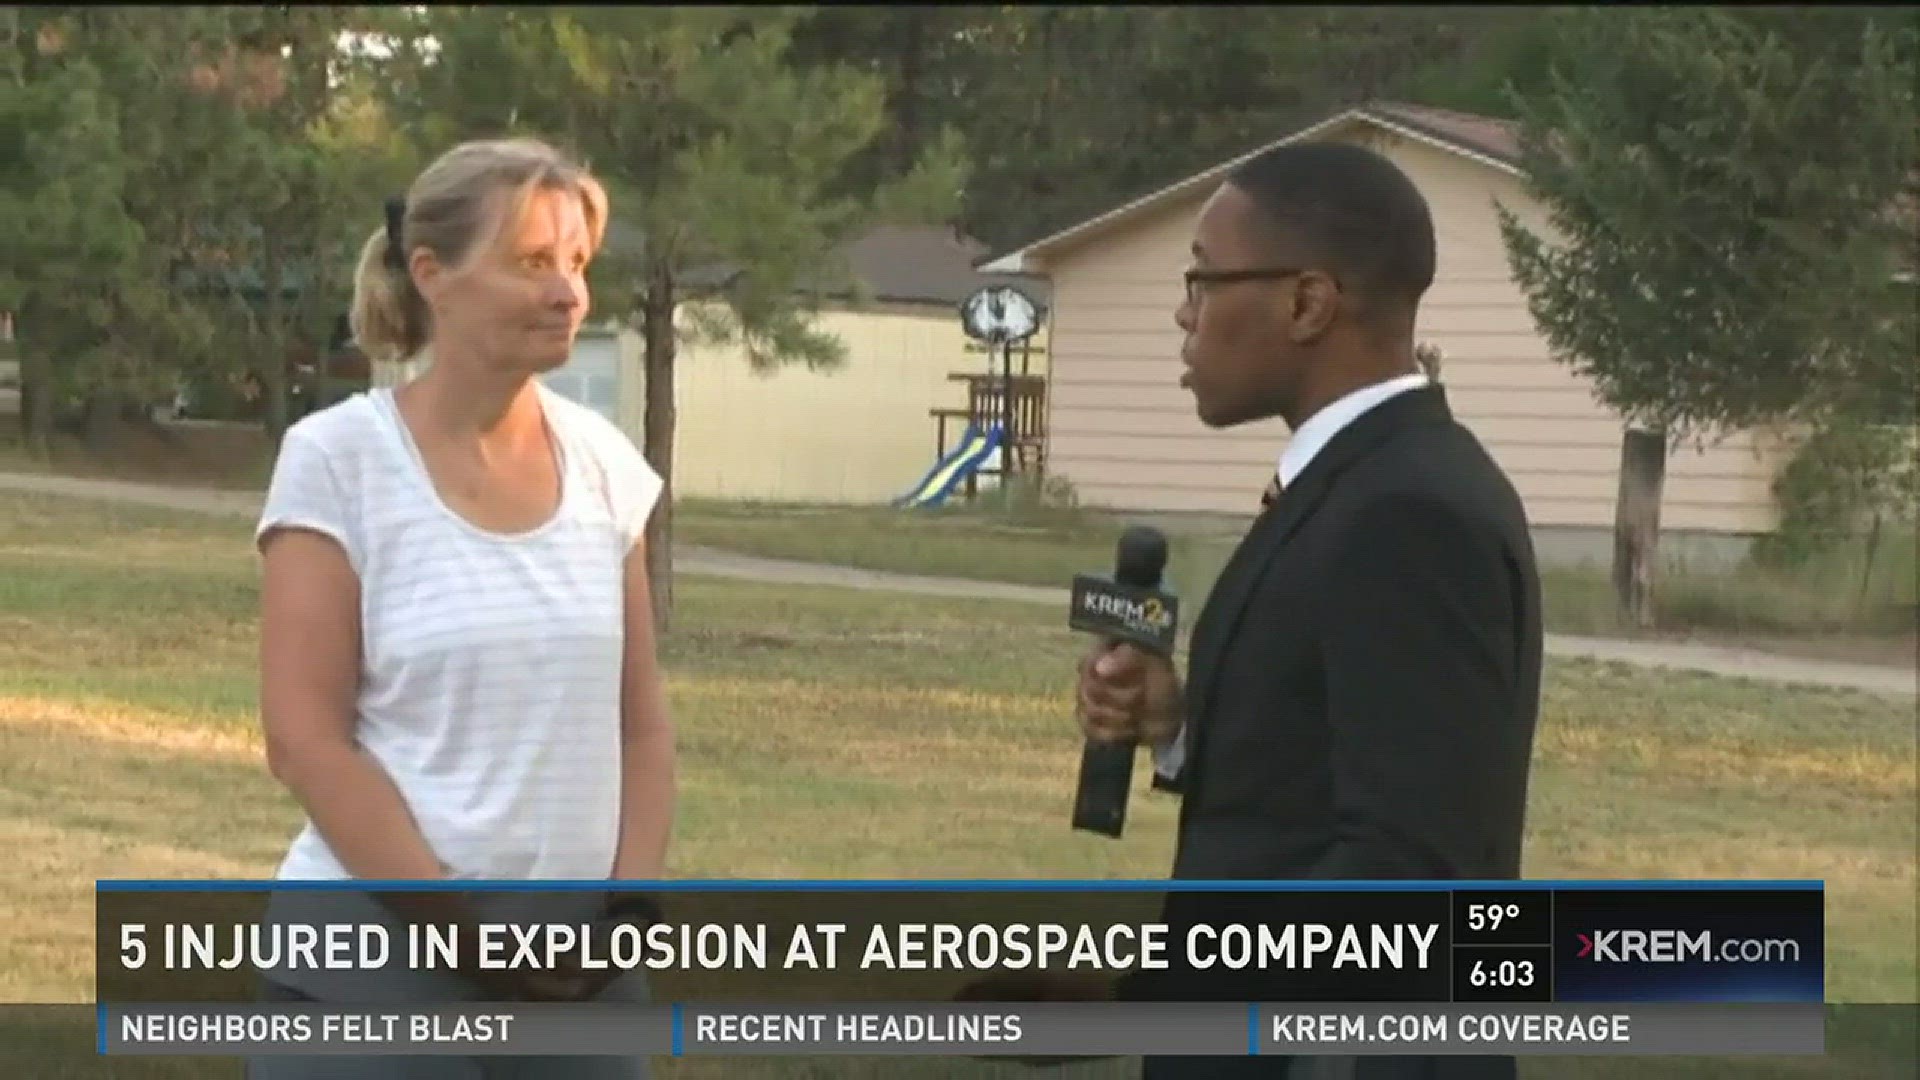 Newport residents spoke with KREM 2's Raishad Hardnett on Wednesday about their reactions to the explosion at an aerospace plant.